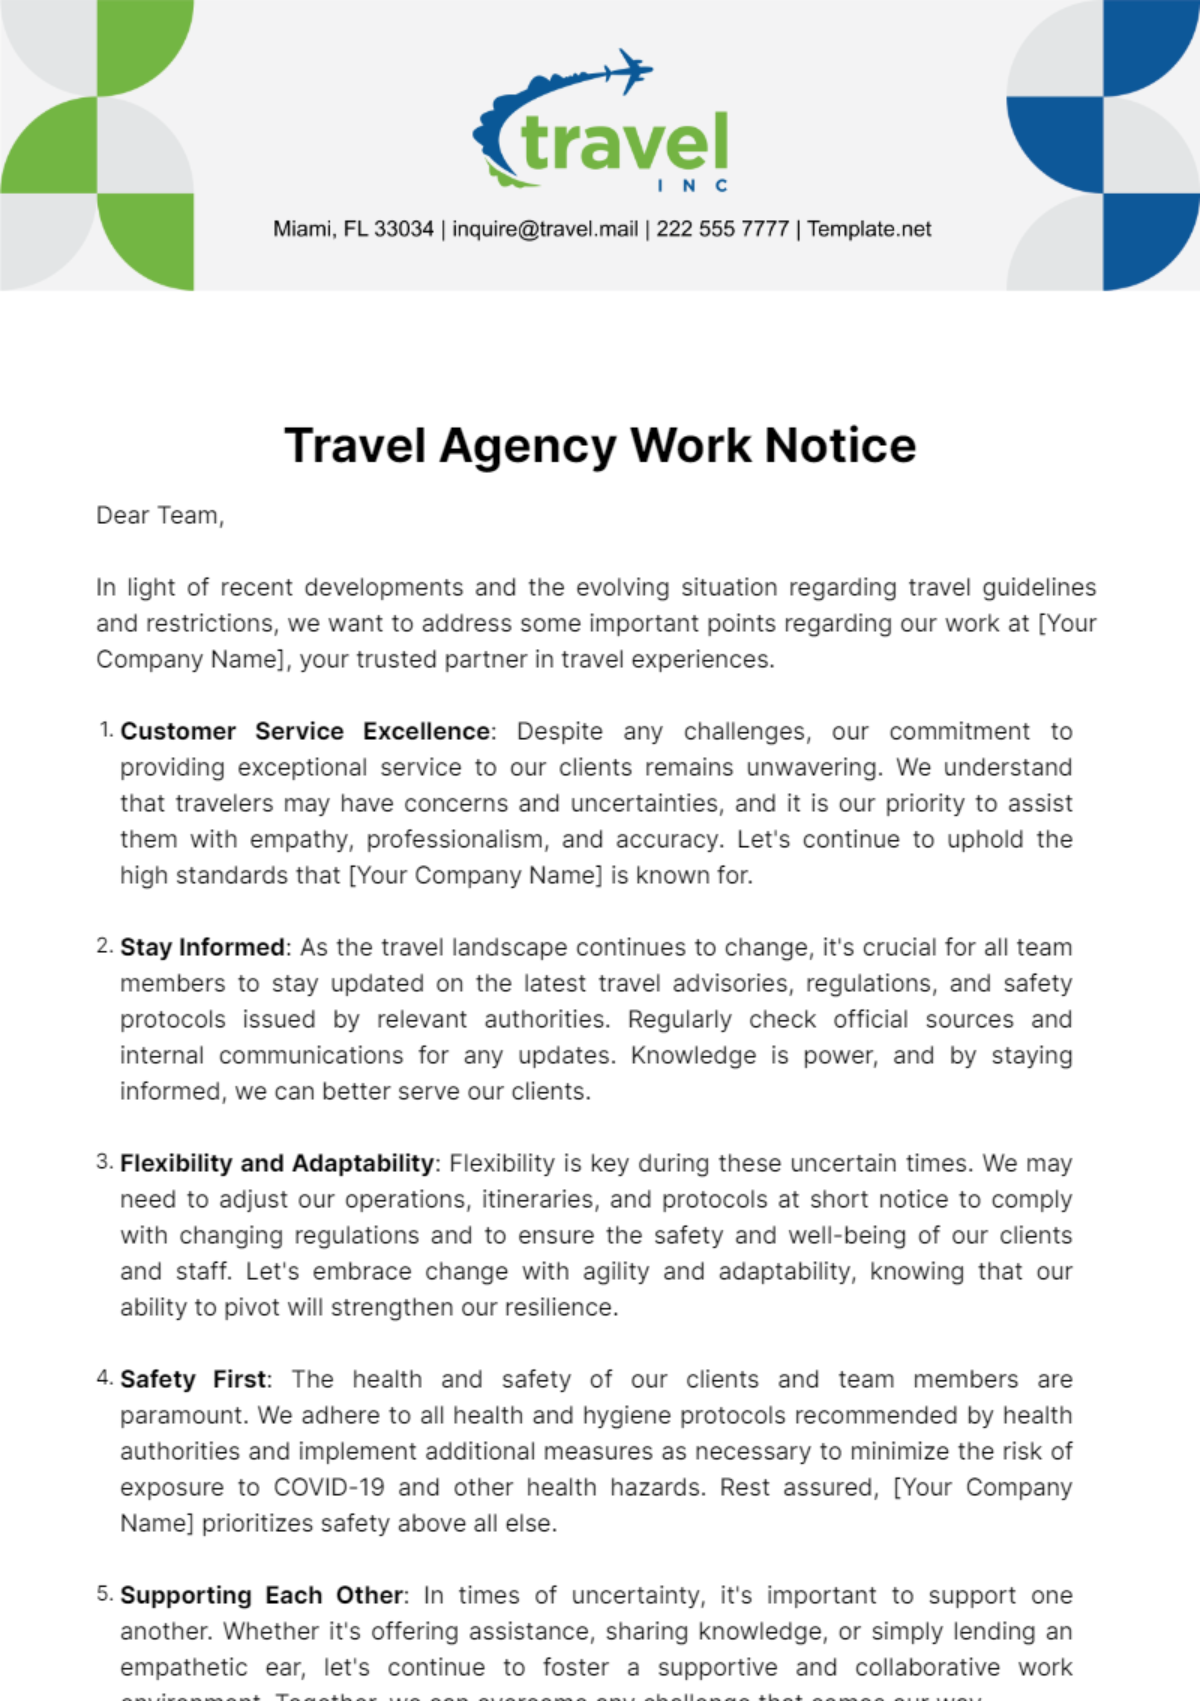 Travel Agency Work Notice Template